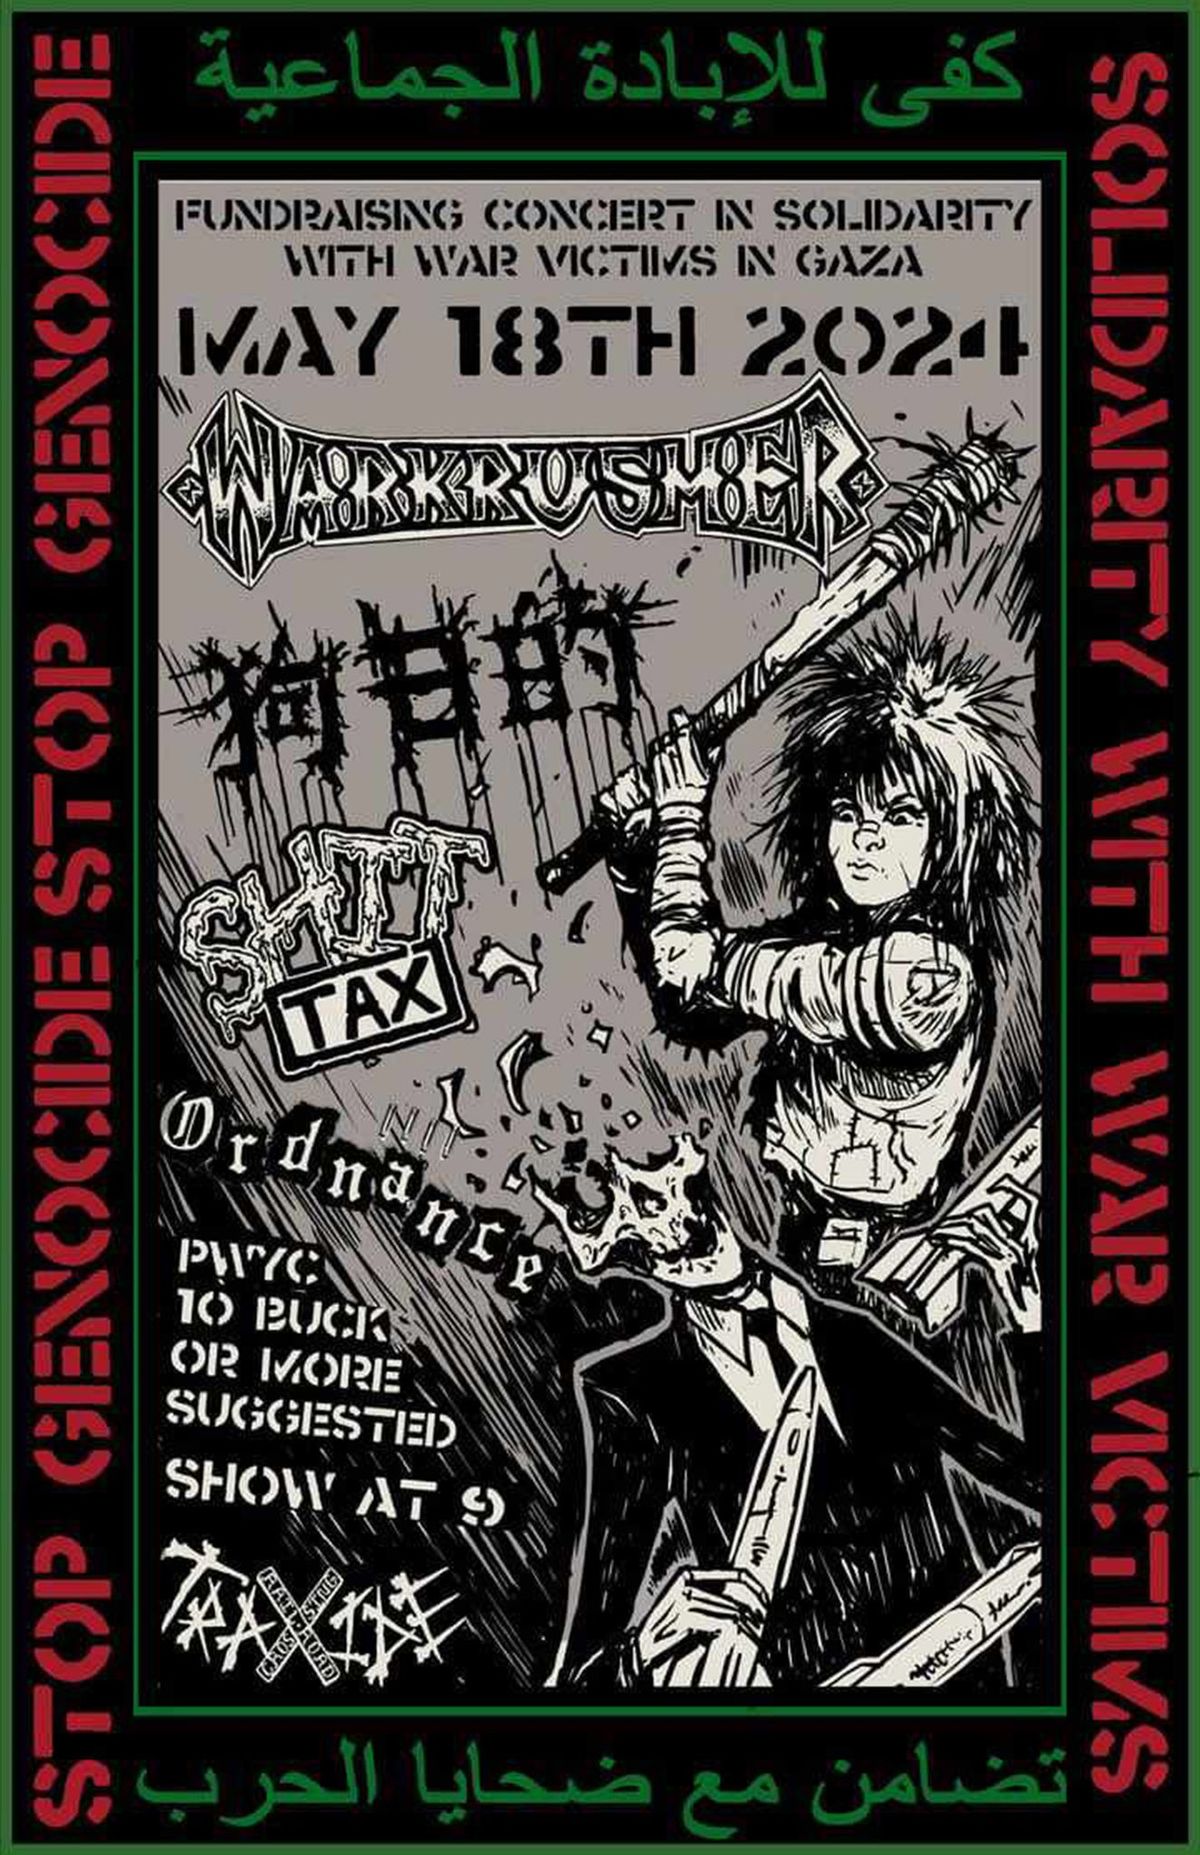 Benefit punk show for Gaza at Traxide!